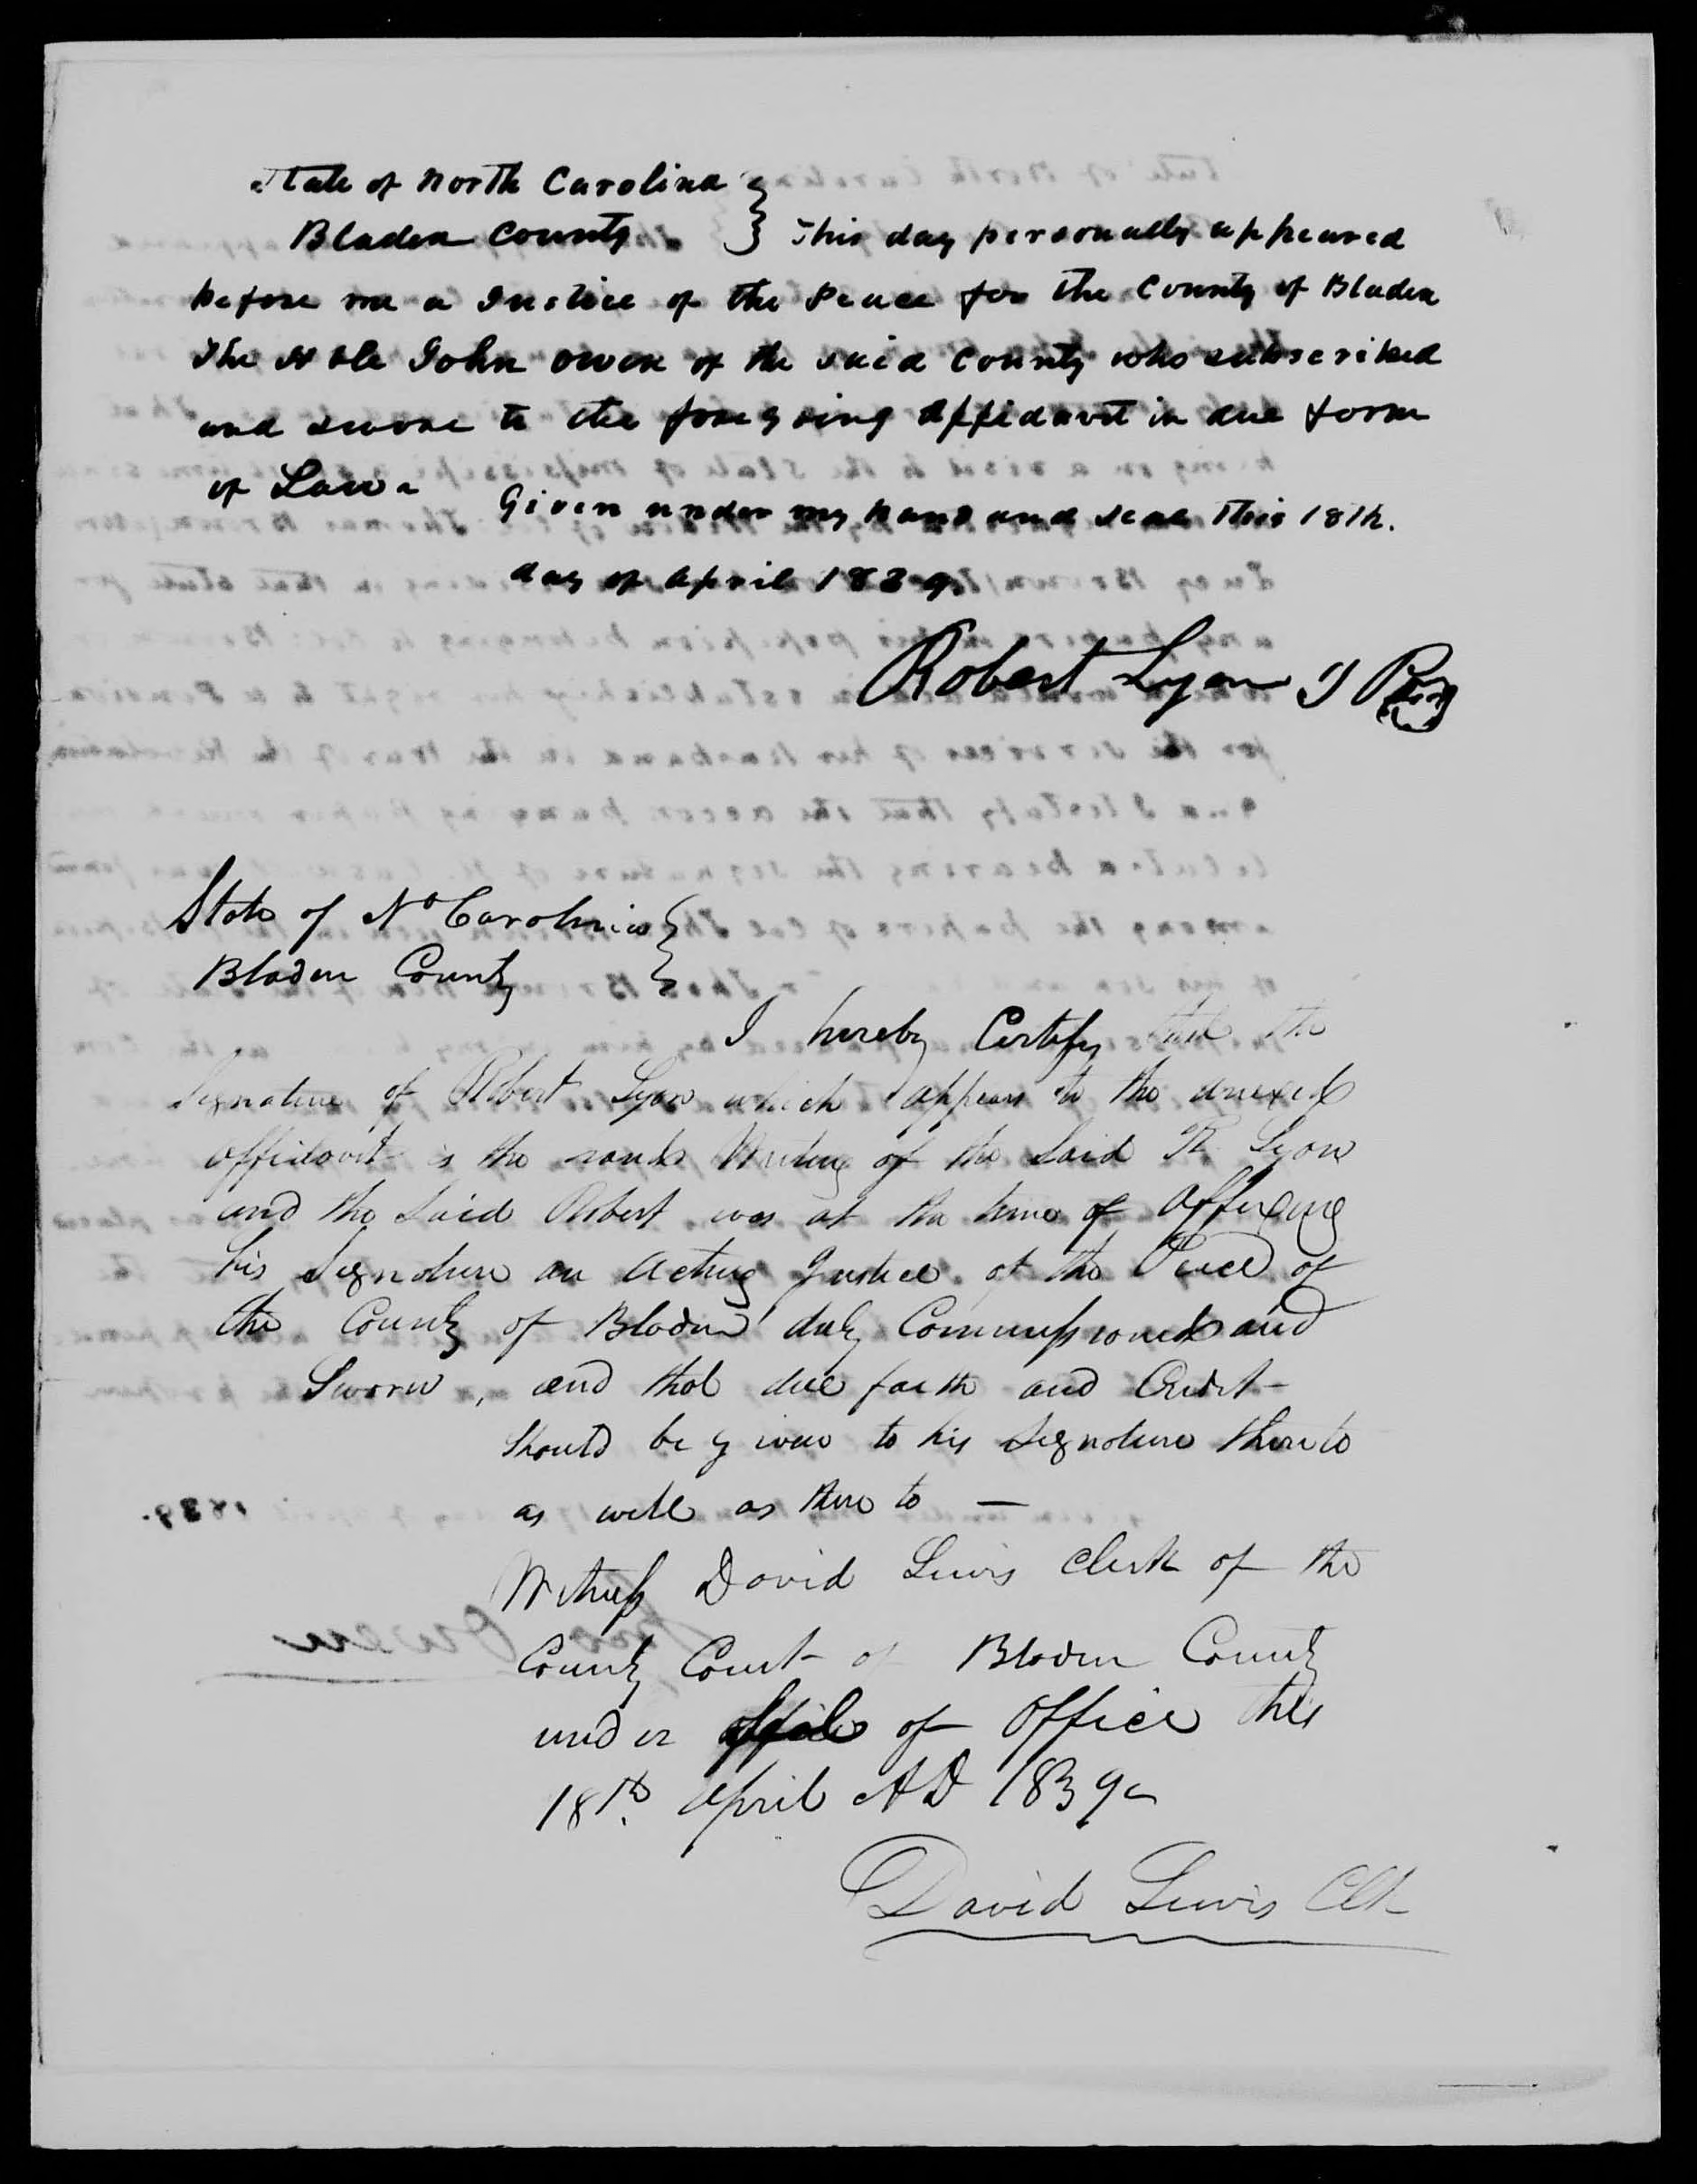 Affidavit of John Owen in support of a Pension Claim for Lucy Brown, 17 April 1839, page 2